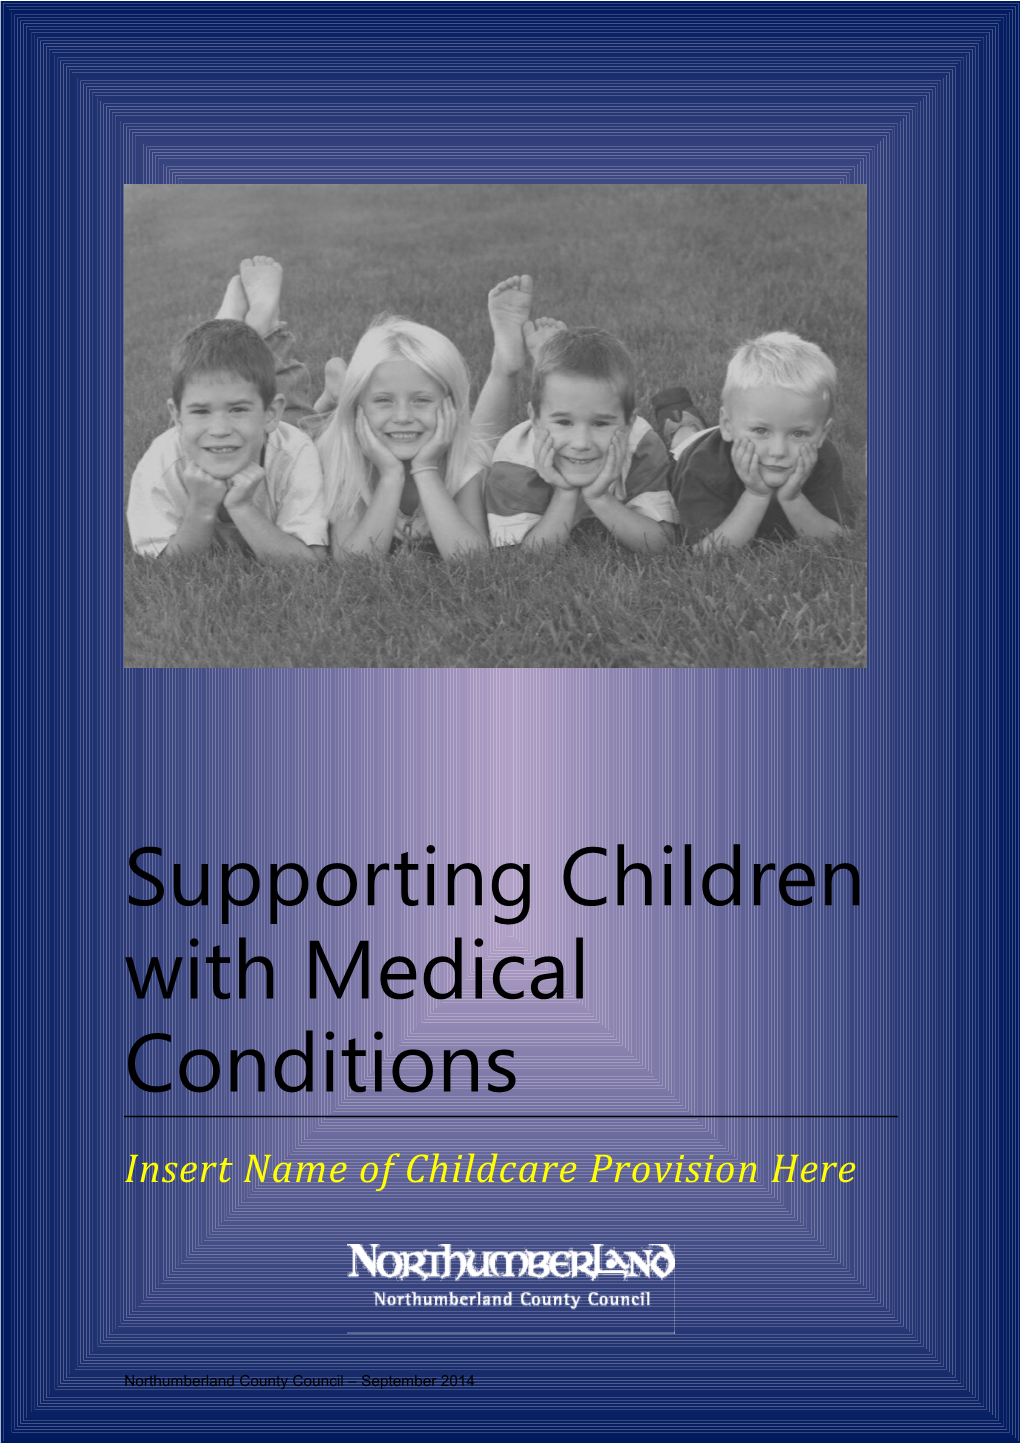 Supporting Pupils with Medical Conditions - Sept 2014